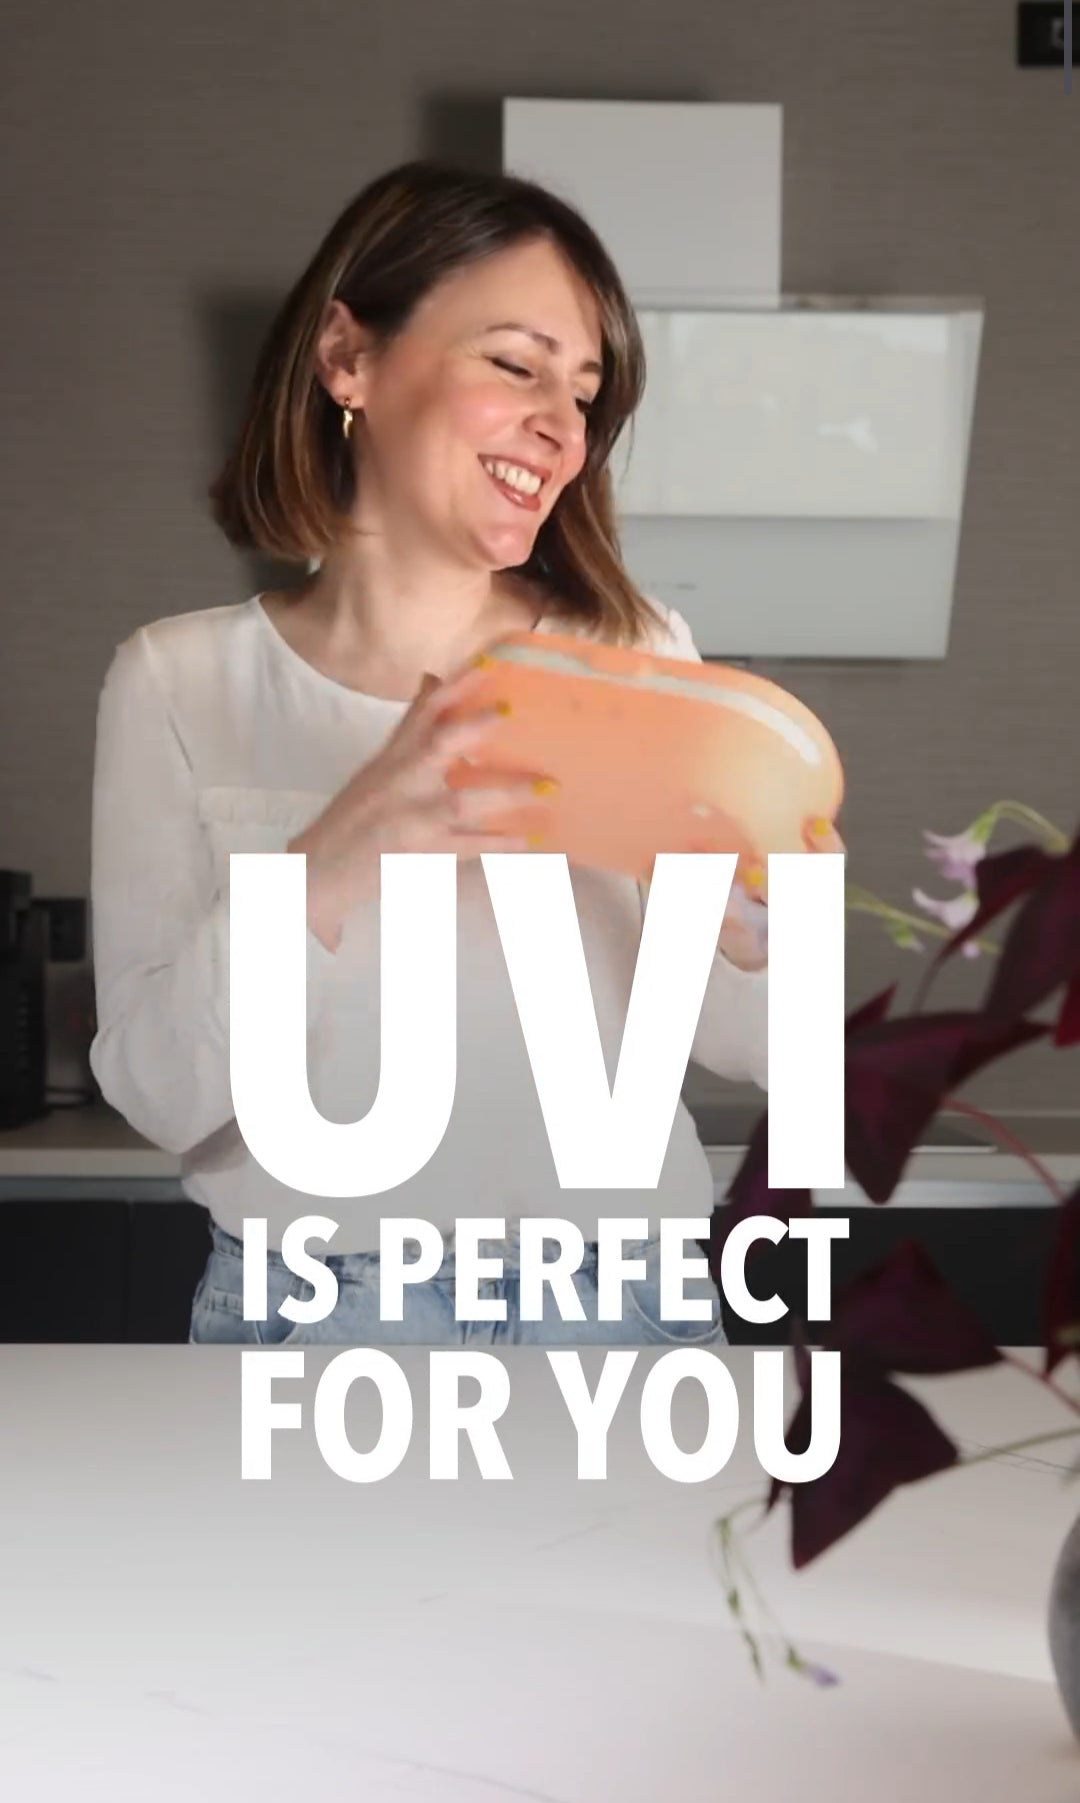 Don't use containers that retain bad odors anymore! Use UVI lunchbox⁠